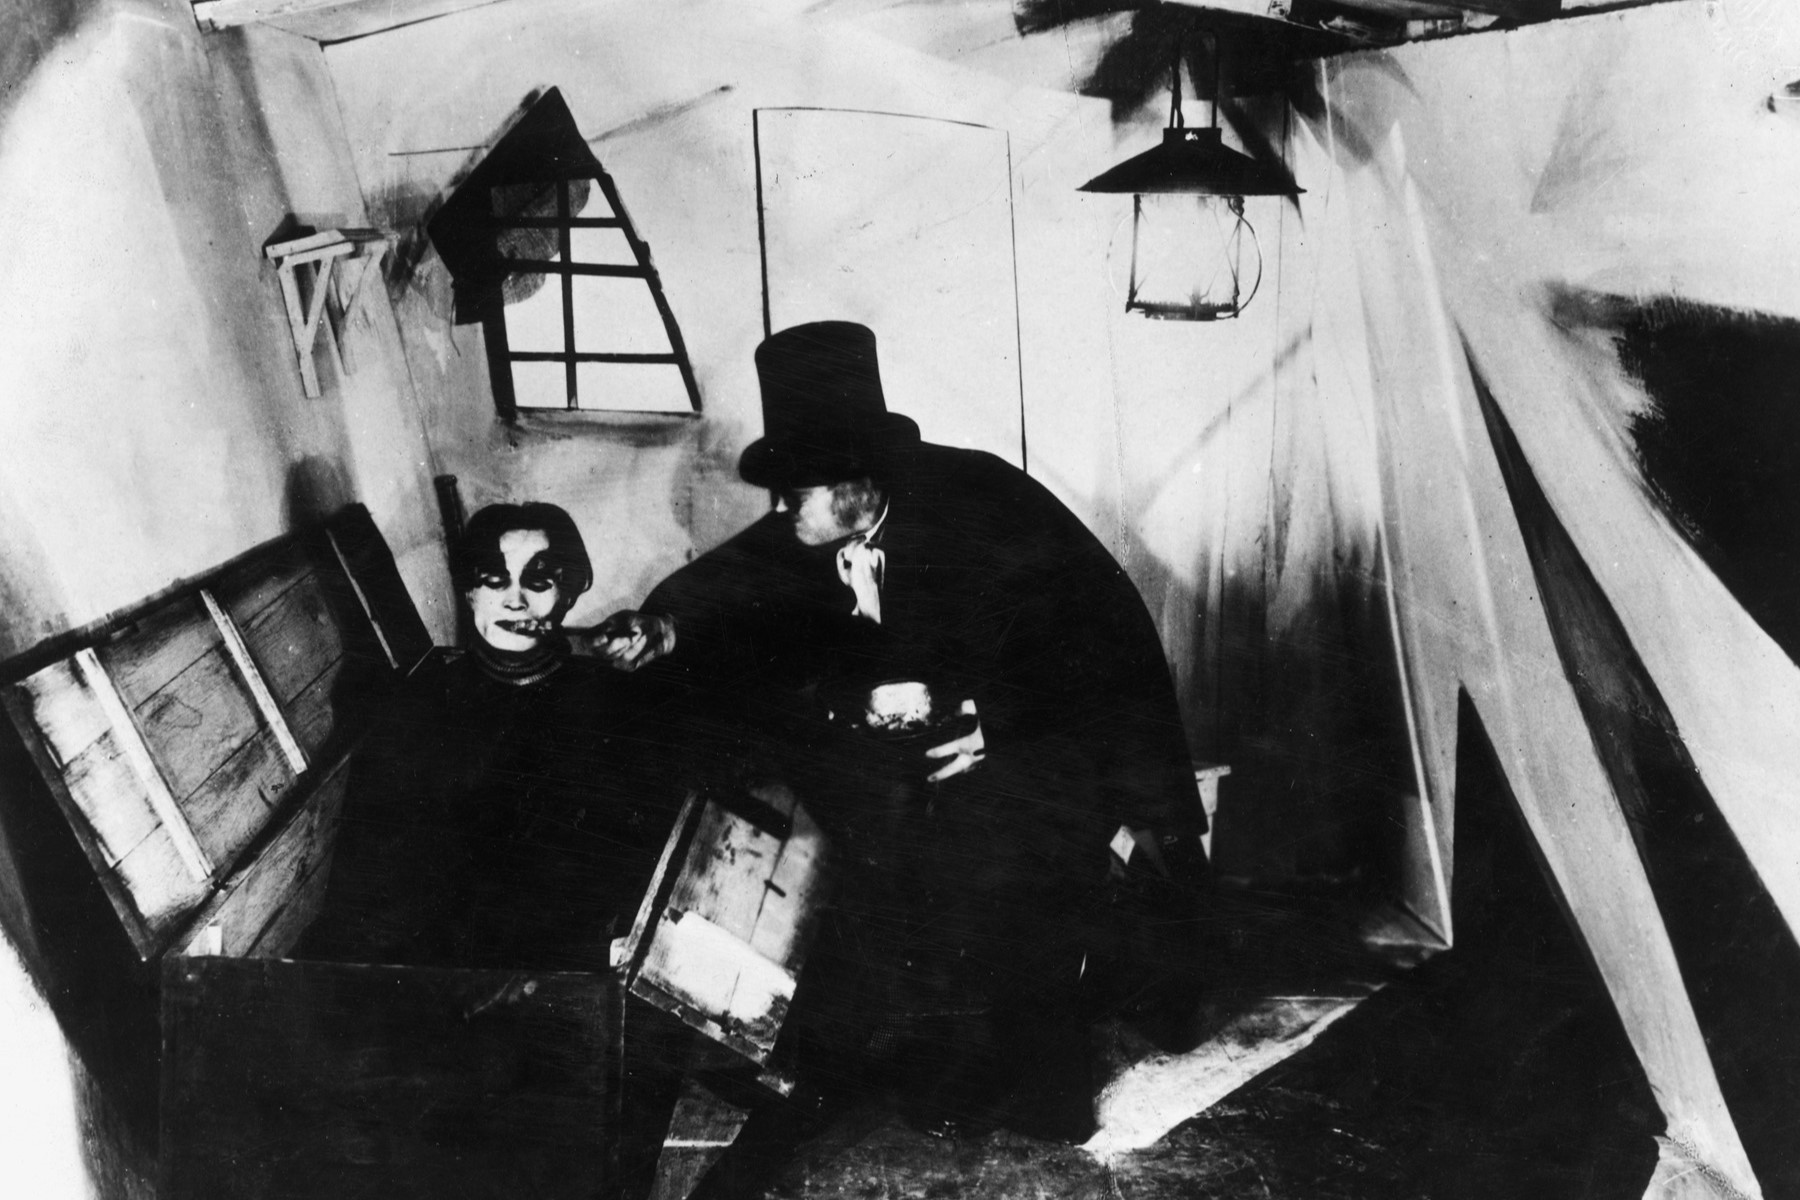 scene from the 1920 film The Cabinet of Dr. Caligari